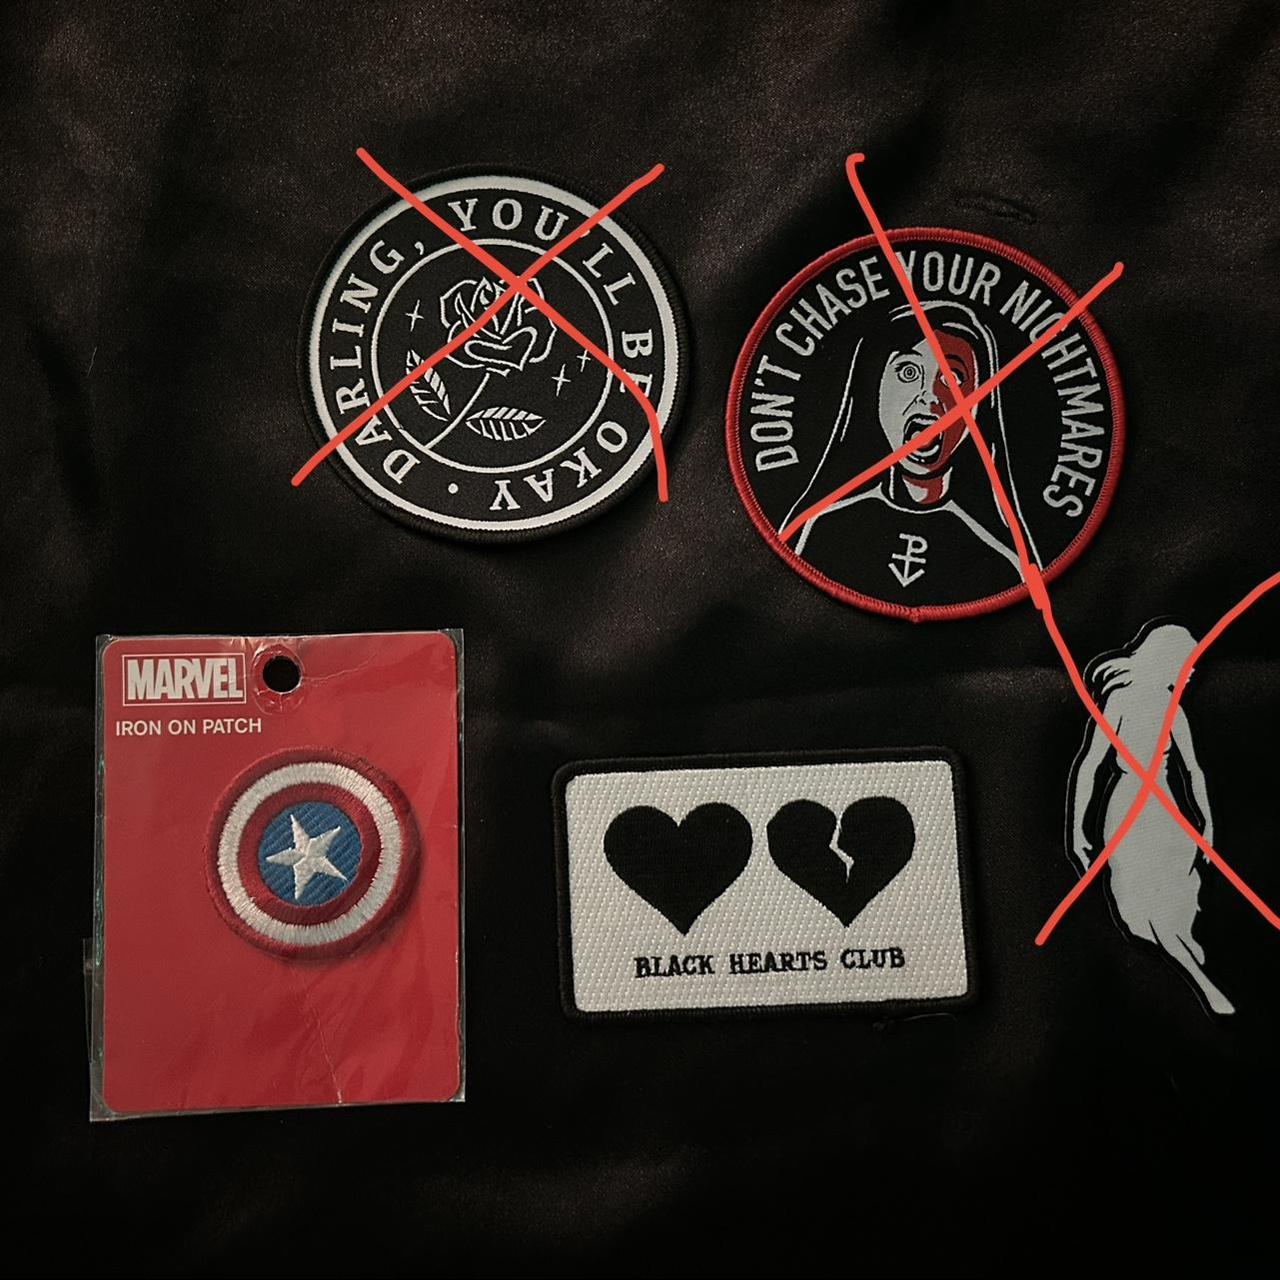 LV Iron on patches - $5 each or 3 for $12 Untracked - Depop